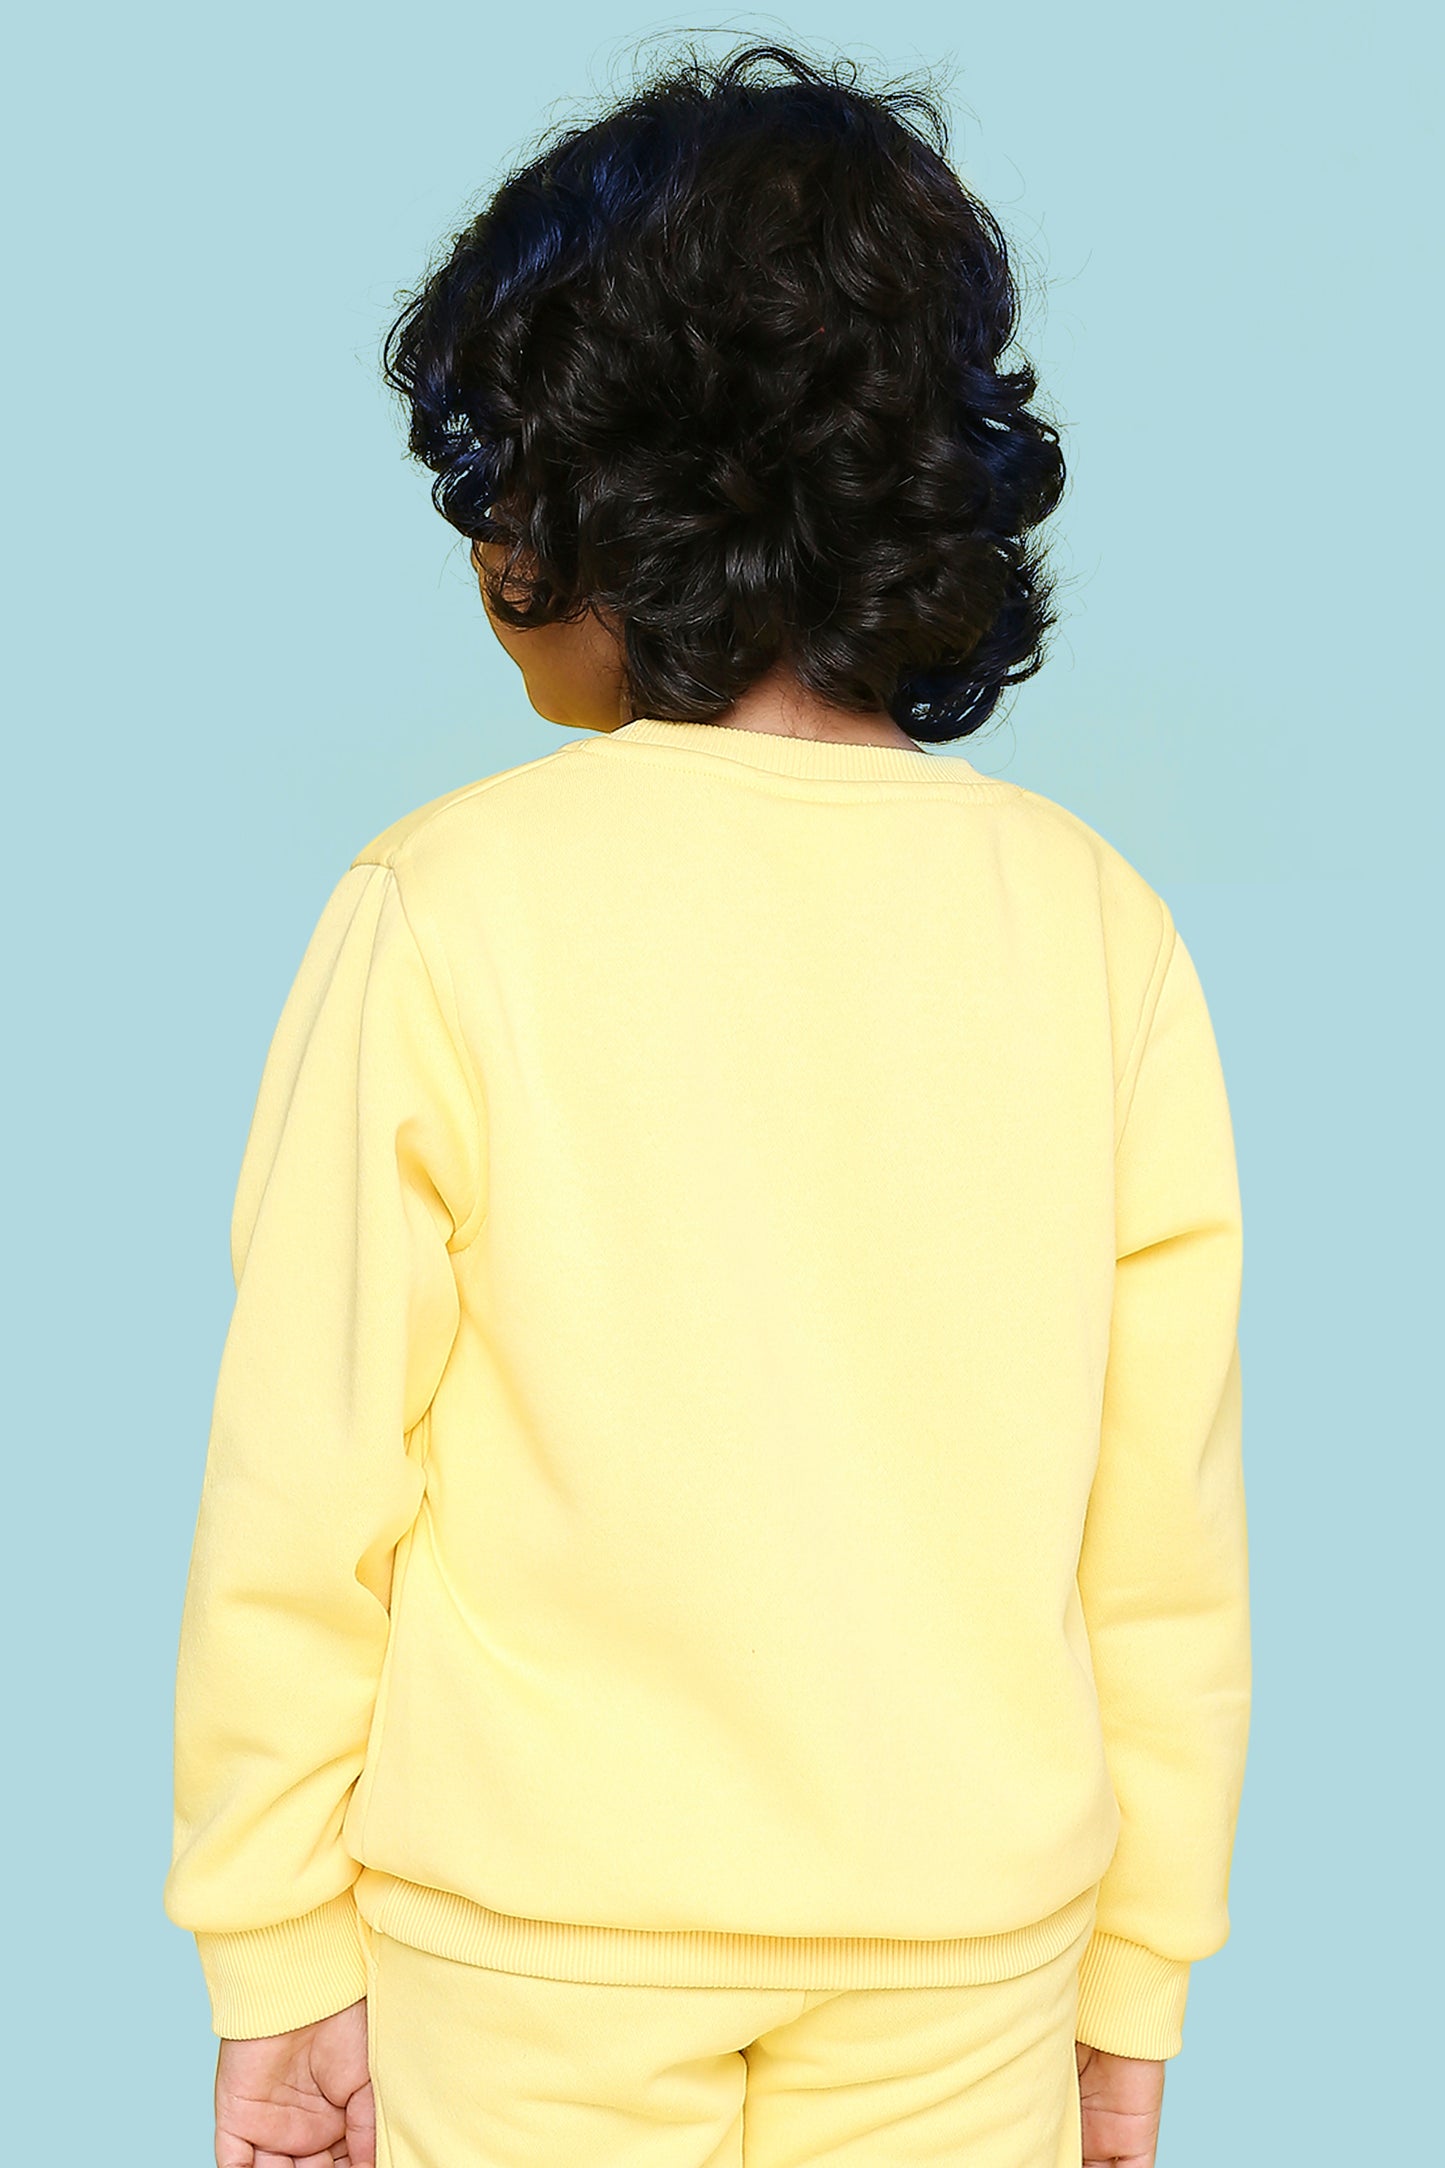 Knitting Doodles Kid's Sweatshirt with Warm Fleece and Pocket in front- Light Yellow